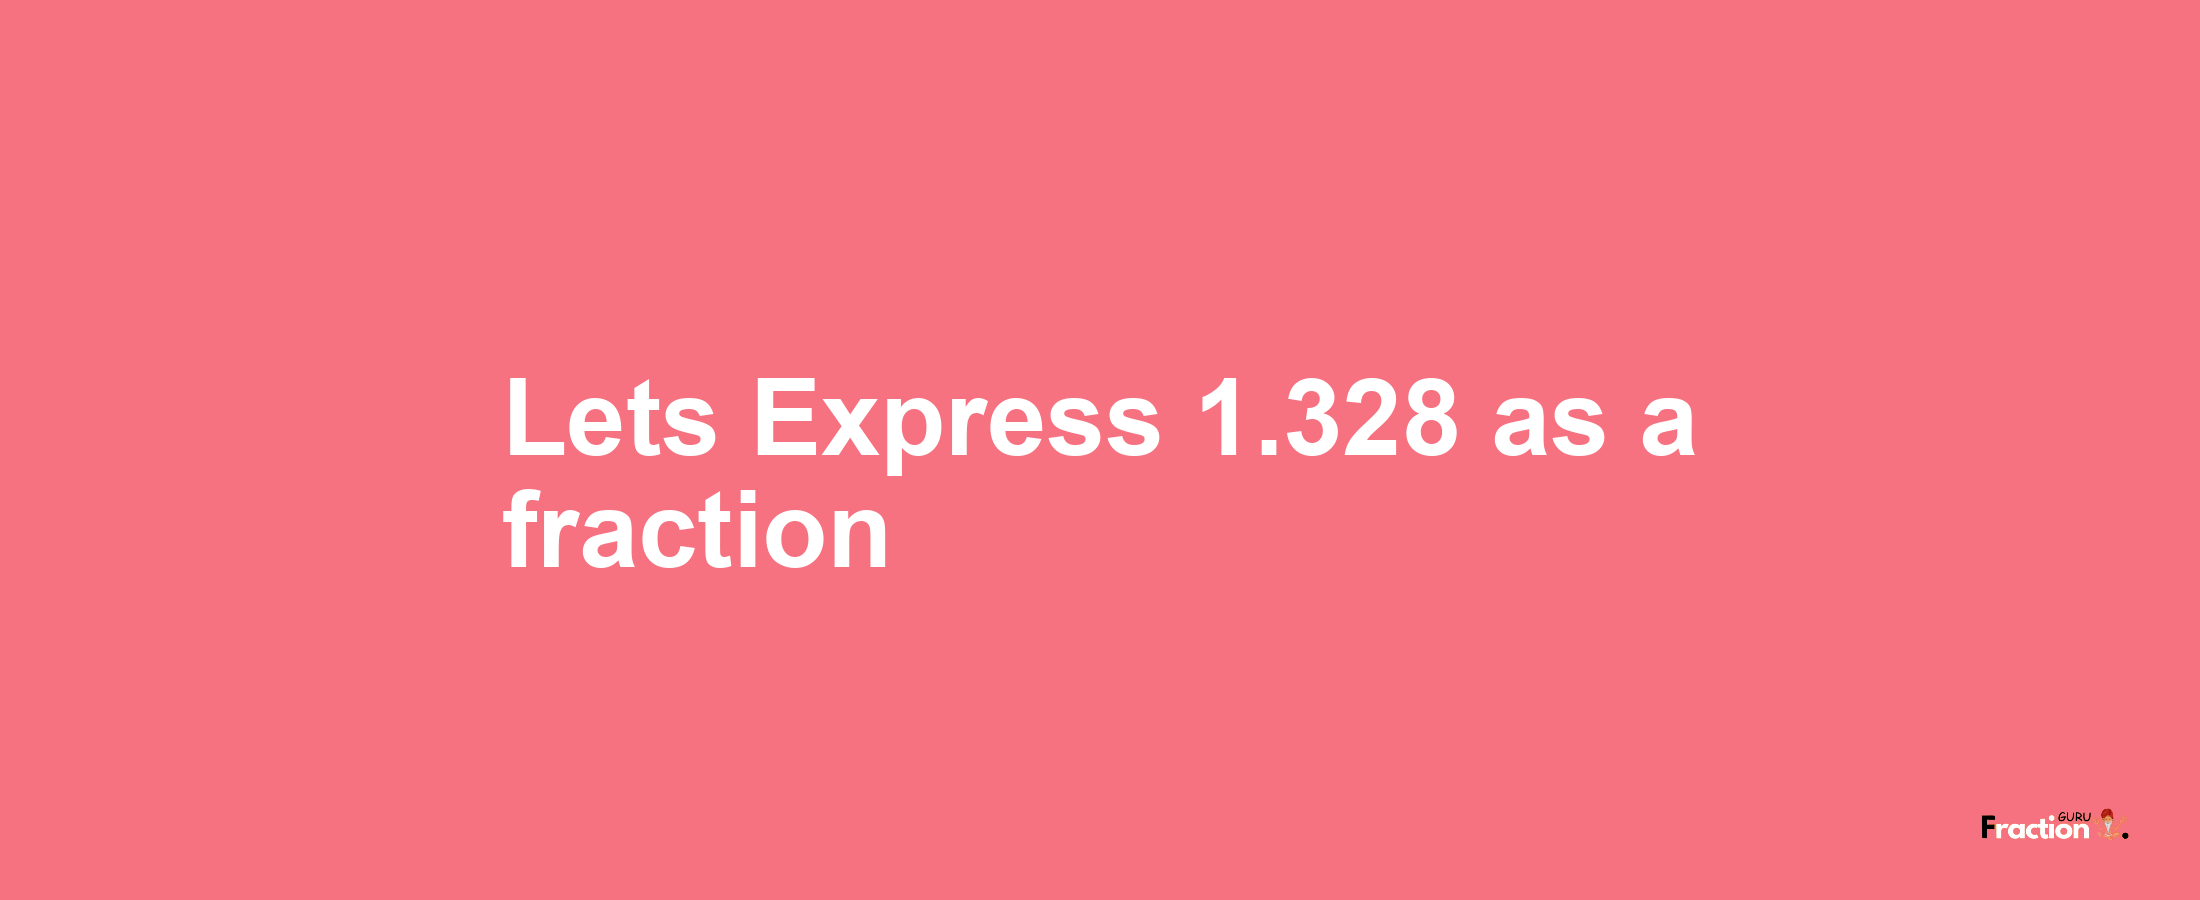 Lets Express 1.328 as afraction